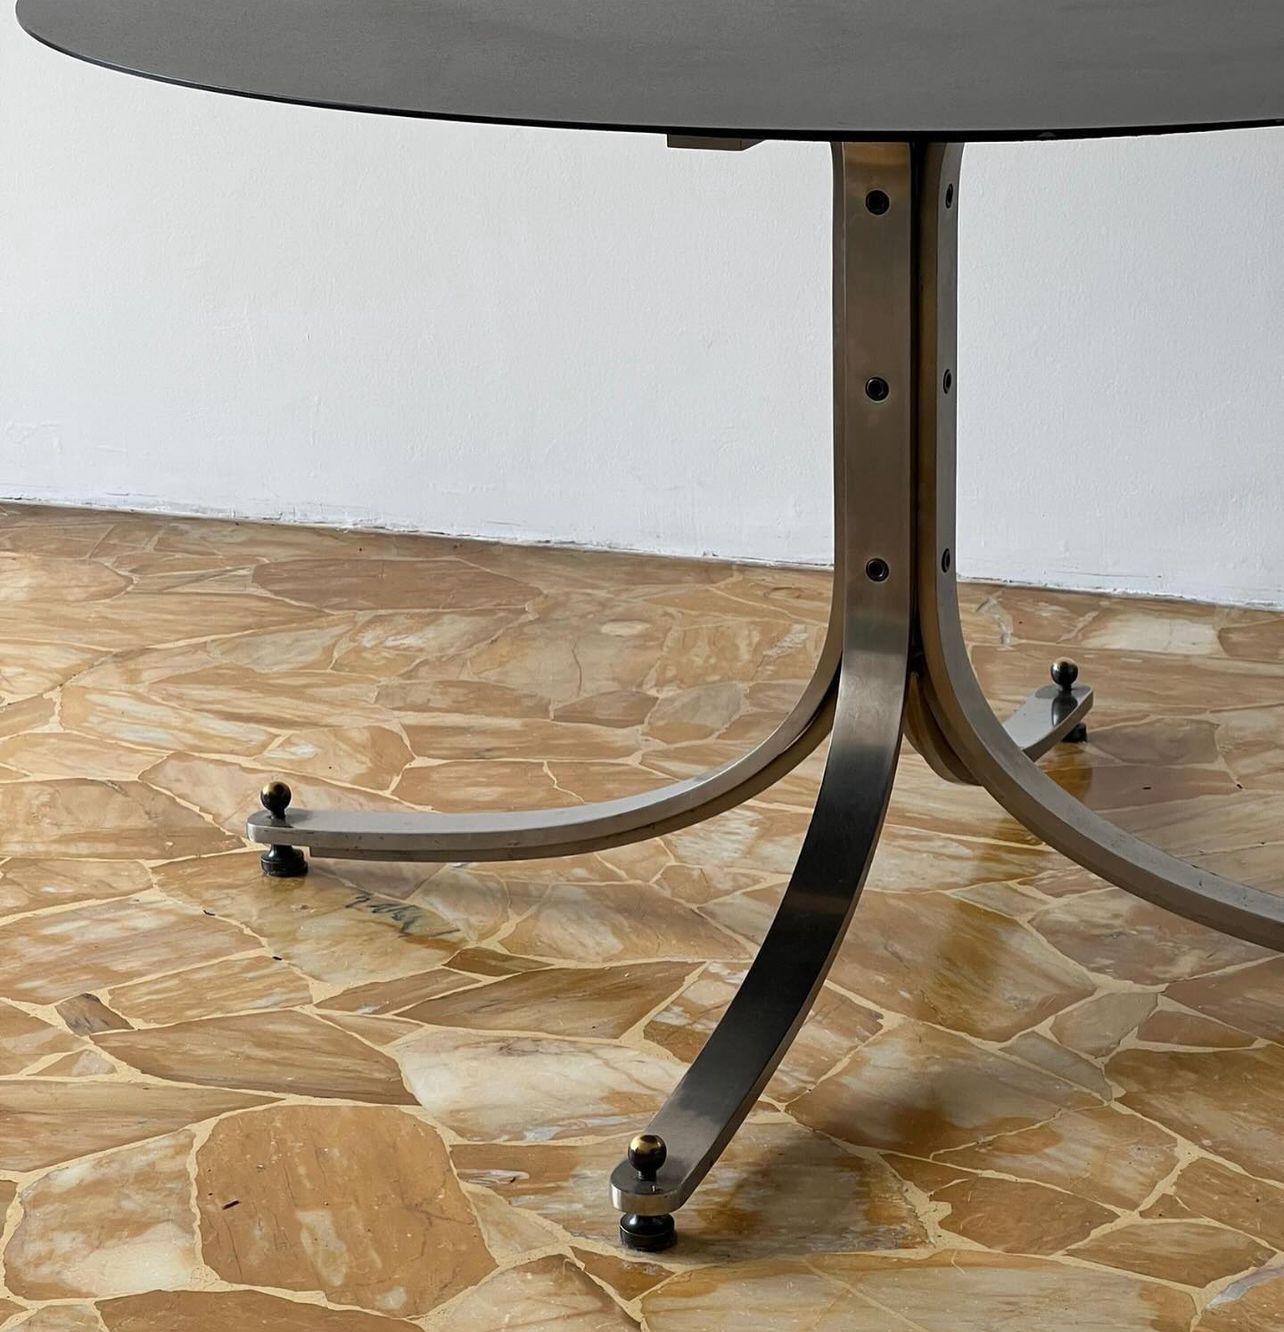 Sculptural Dining Table - Italian Collectible Design - Sergio Mazza Stainless Steel Table

Beautiful and timeless dining table designed by Sergio Mazza for Italian furniture brand Arflex in 1962. The four legs are made in brushed stainless steel,